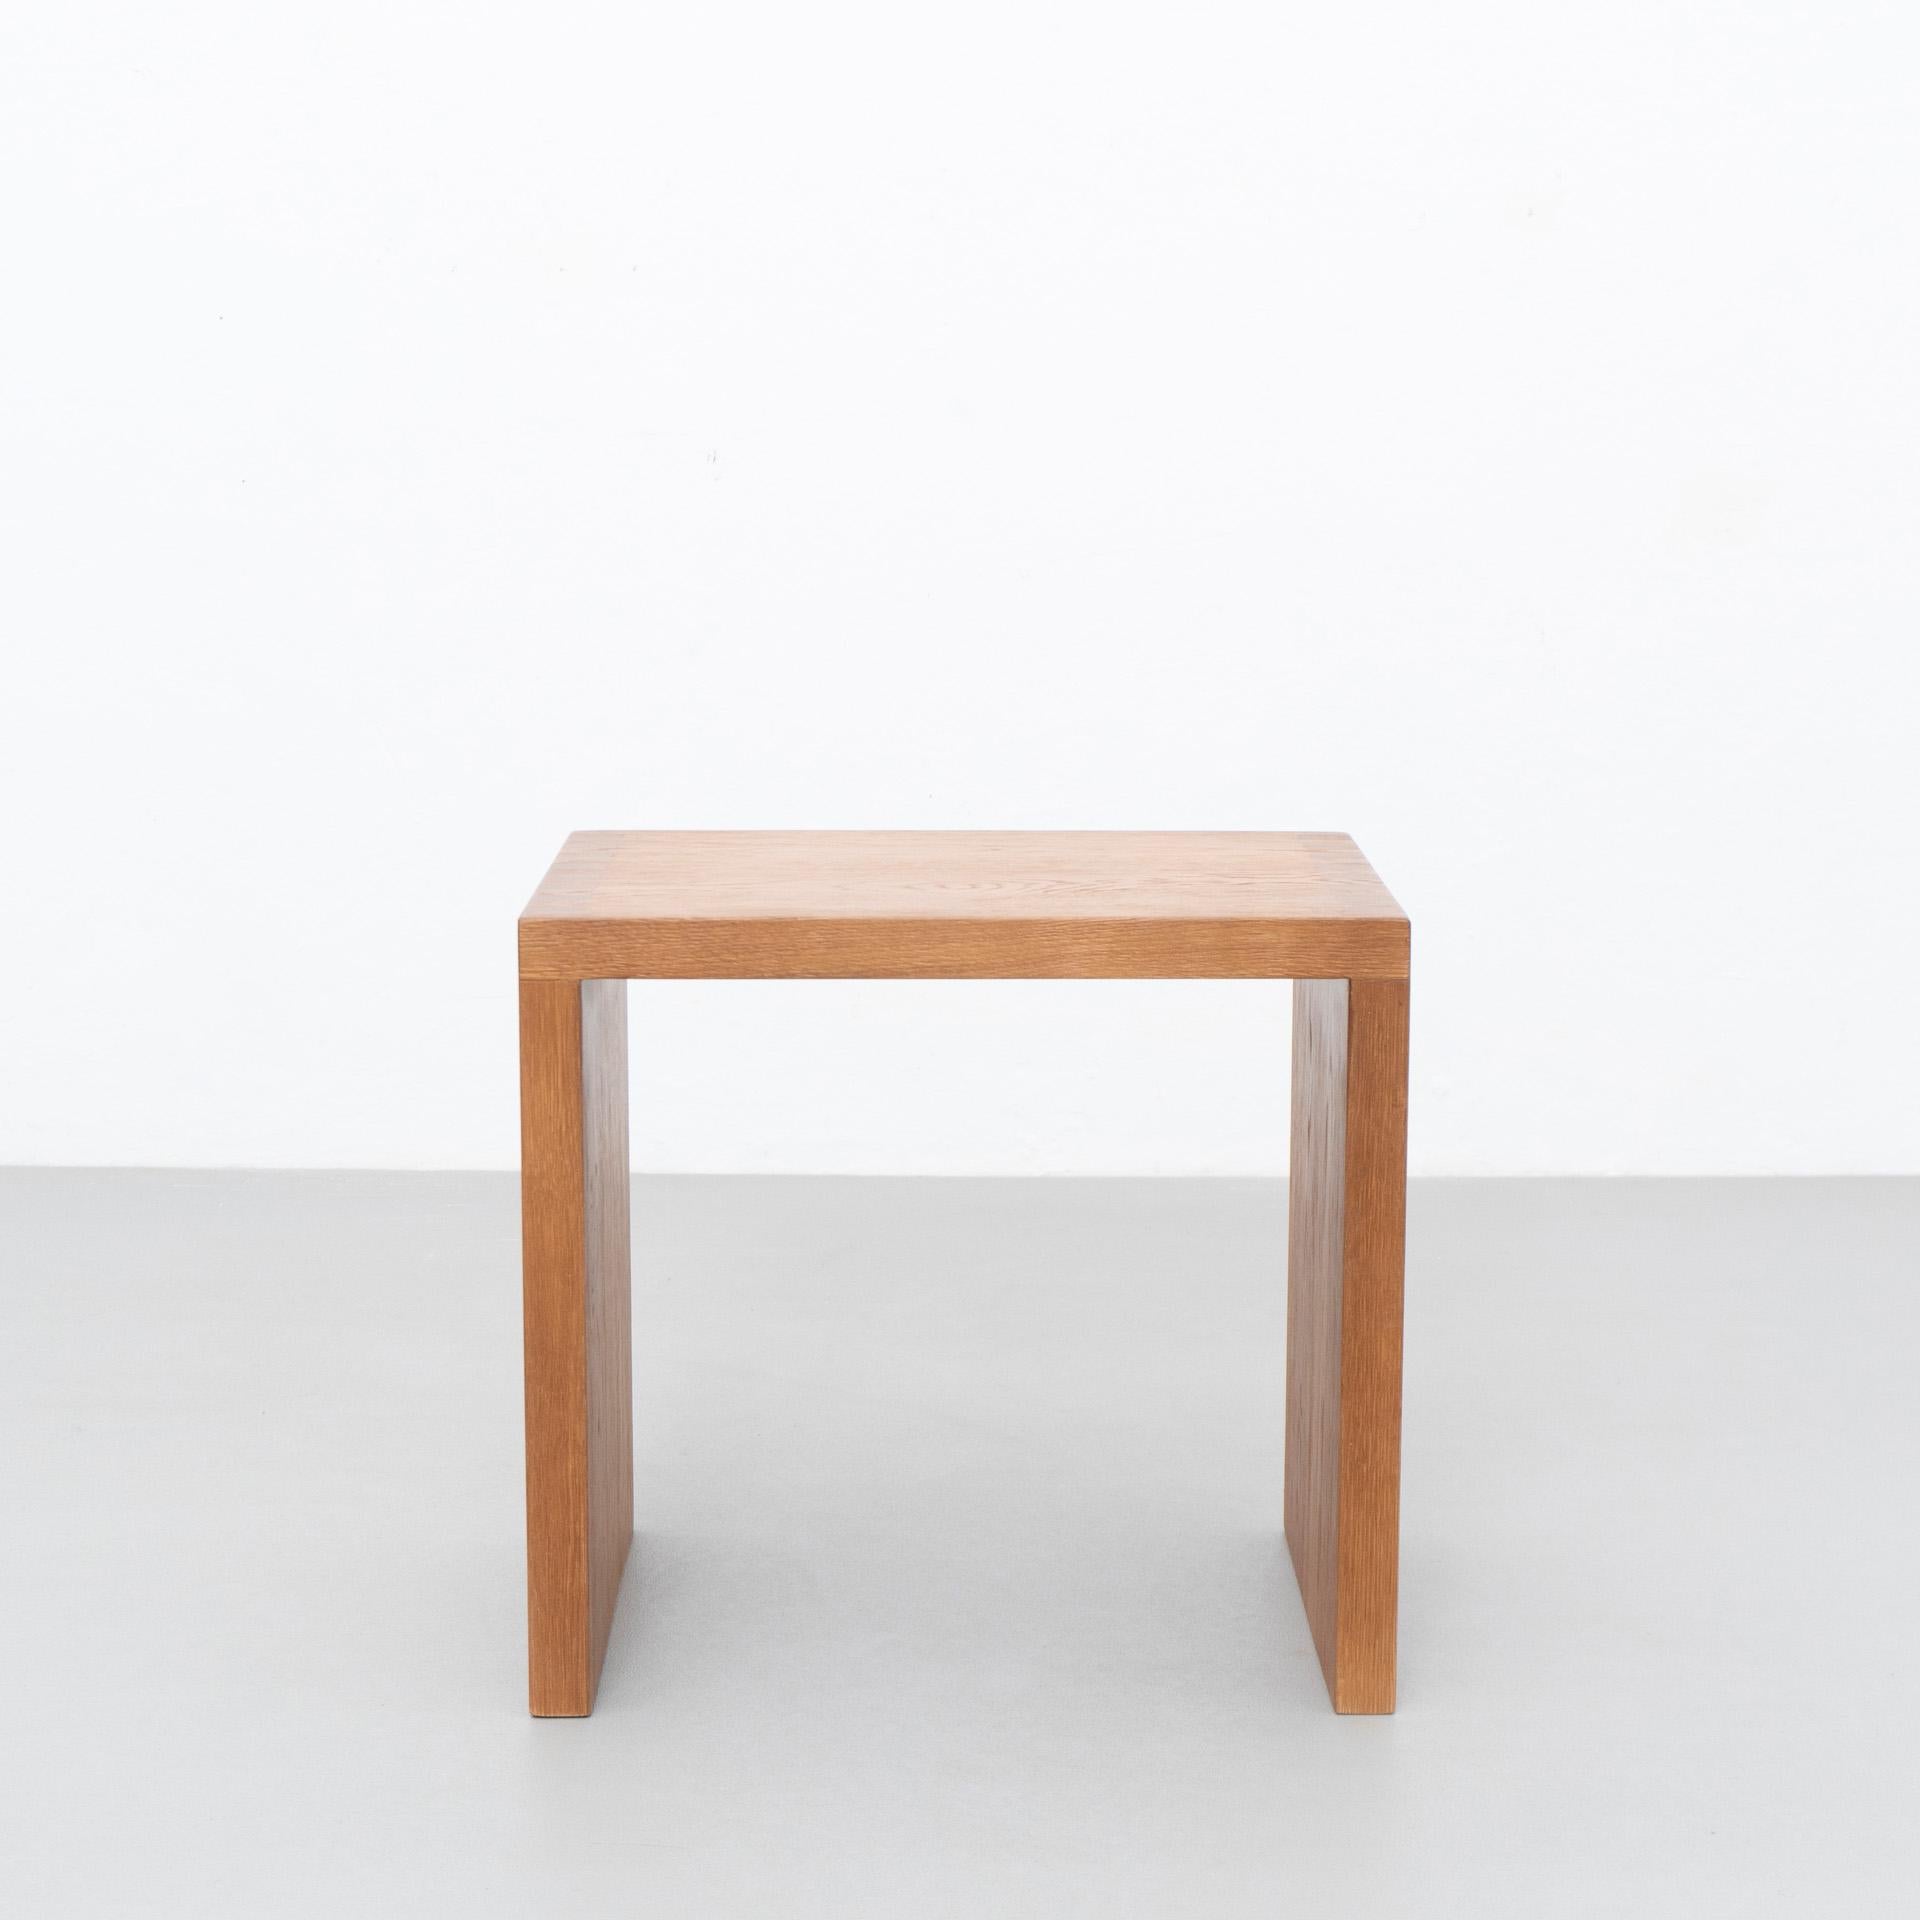 Table by Dada est. manufactured in Barcelona, 2021.

Material: Oak
Dimensions: 32 cm D x 43 cm W x 40 cm H 

There is the possibility of making it in different measures and woods.

Dada Est. Makes a handmade furniture production with the best